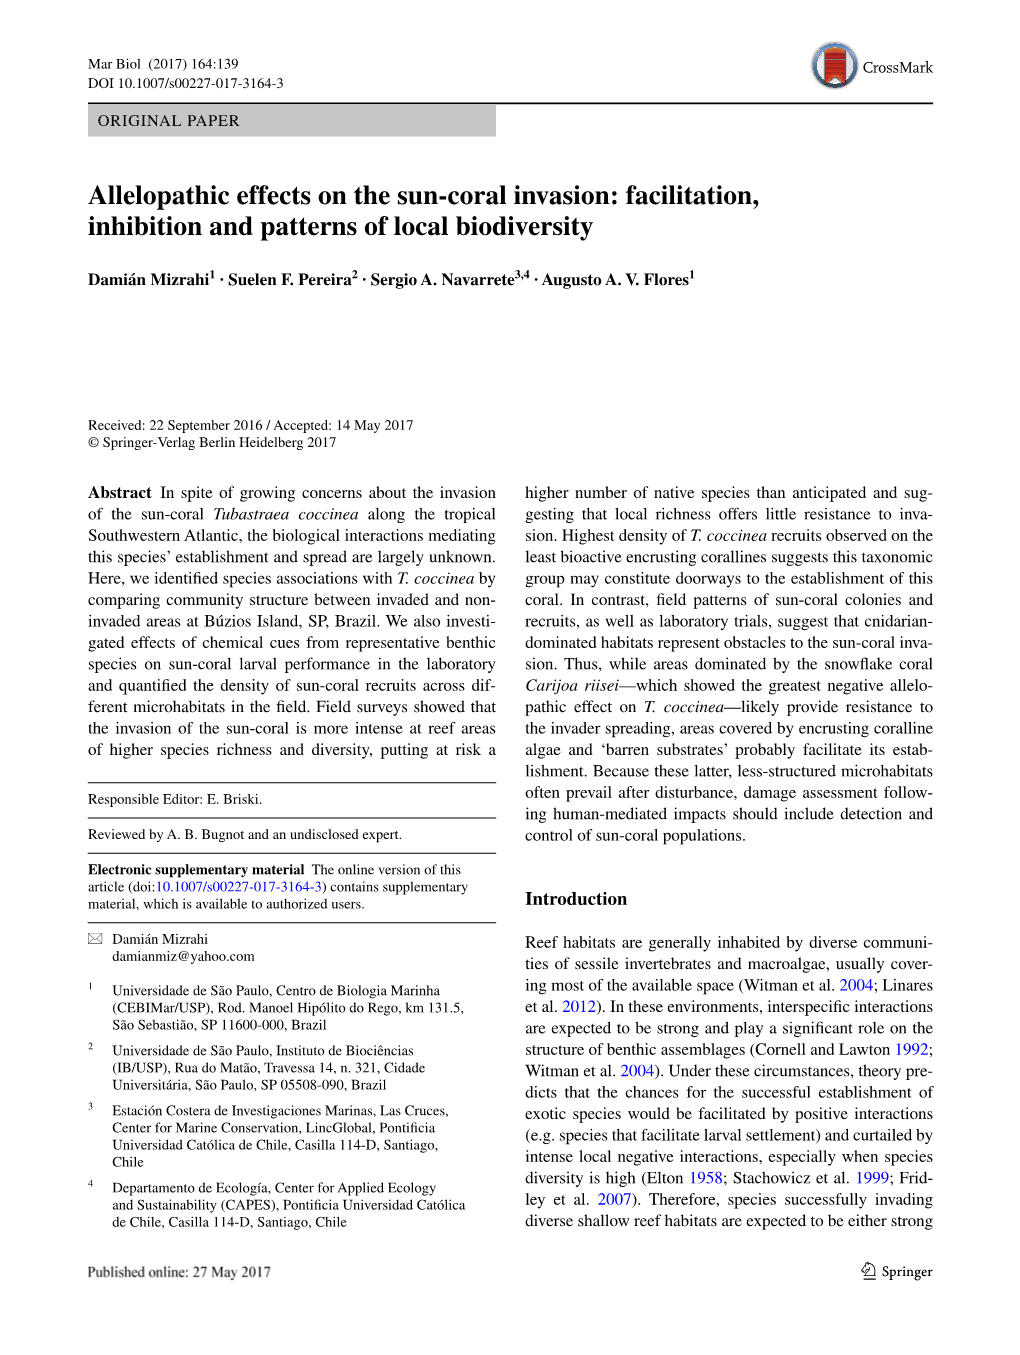 Allelopathic Effects on the Sun-Coral Invasion: Facilitation, Inhibition And